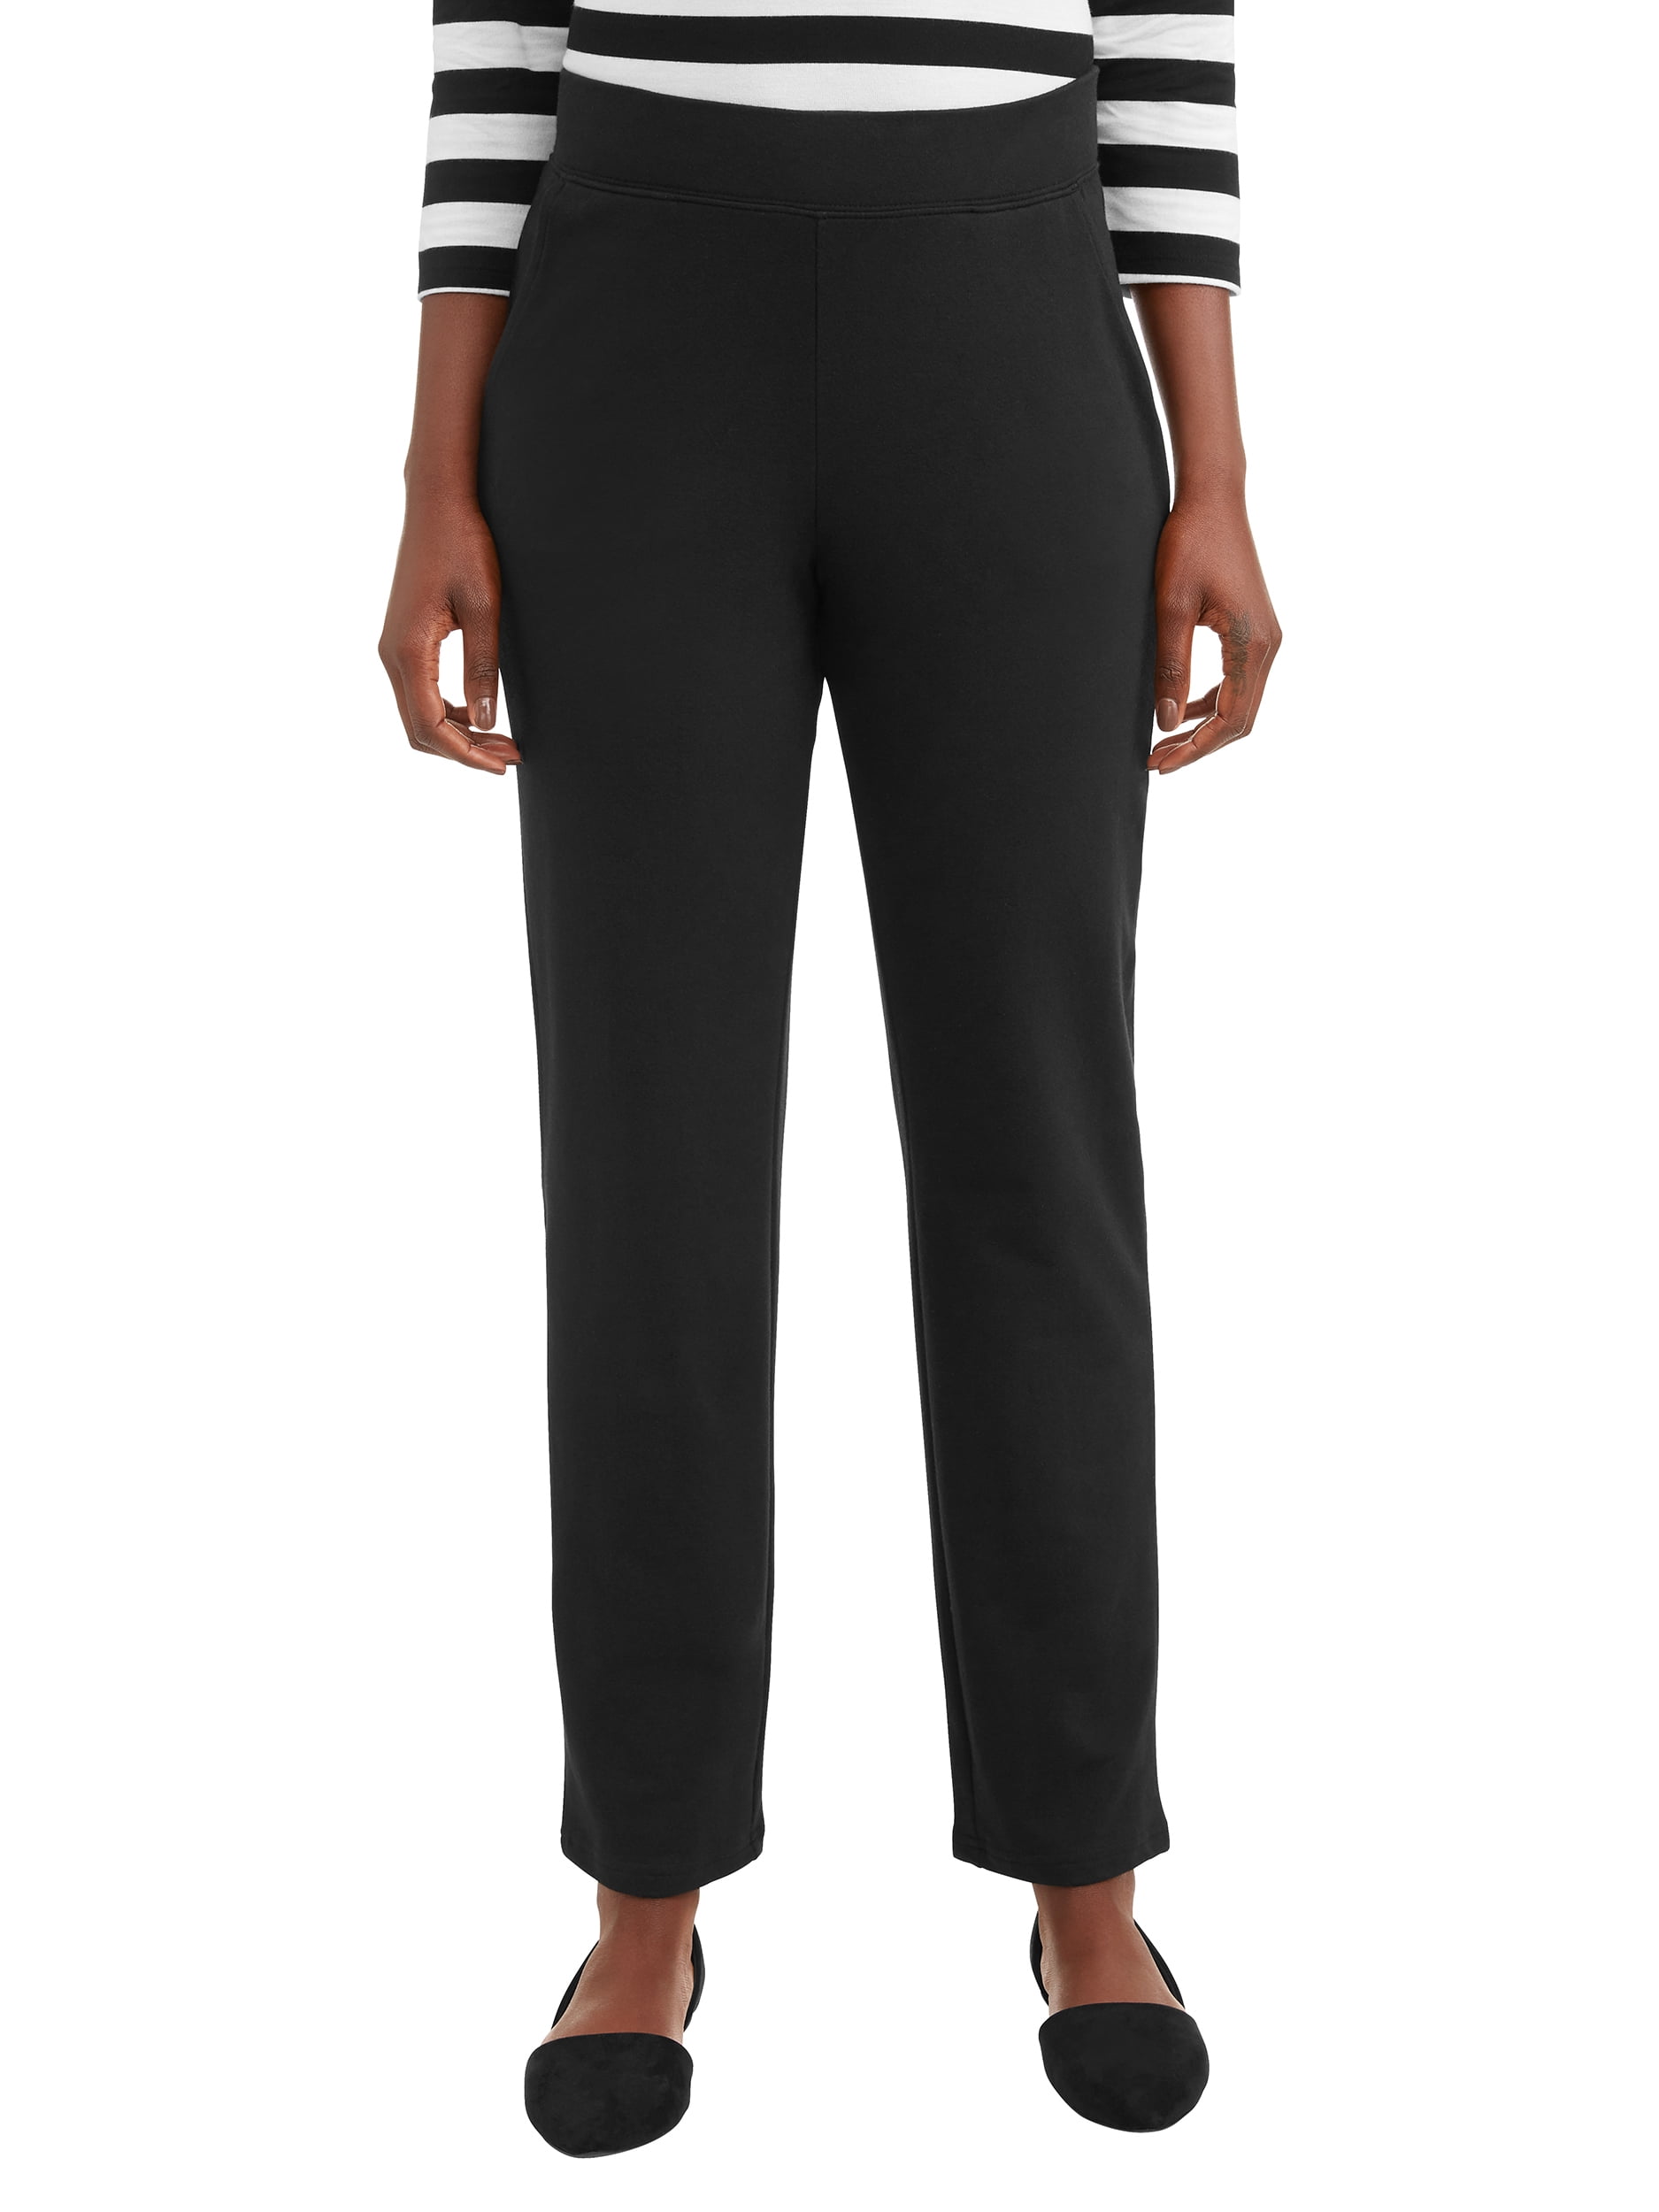 Time and Tru Women's Knit Pull-On Pants 